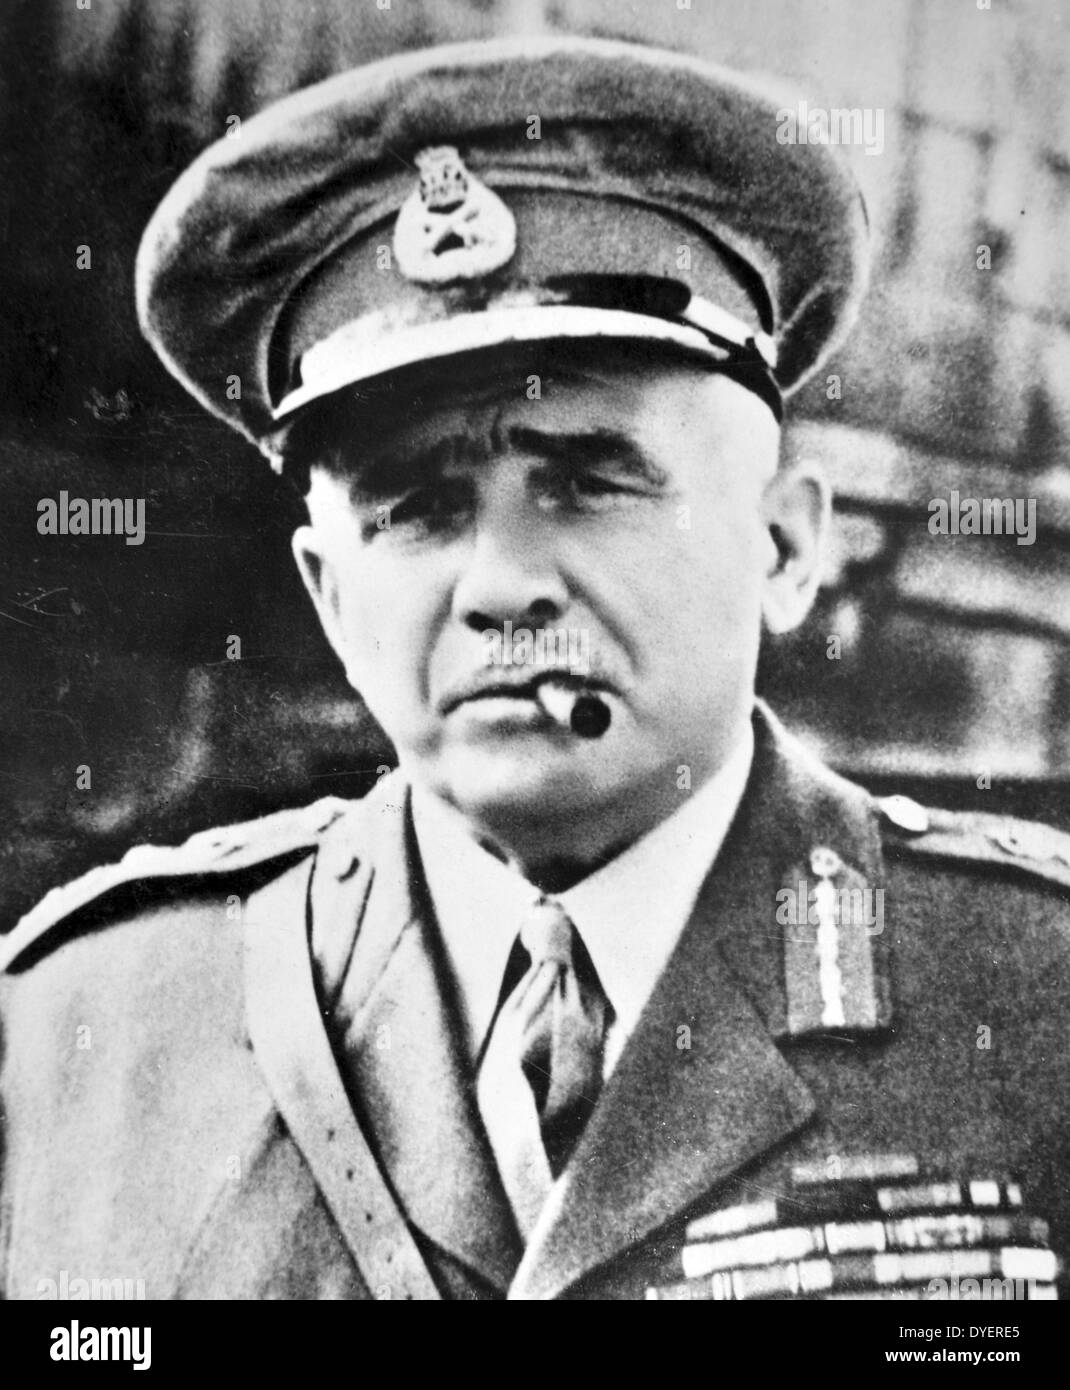 Field Marshal William Edmund Ironside, 1st Baron Ironside GCB, CMG, DSO, (6 May 1880 - 22 September 1959) was a British Army officer who served as Chief of the Imperial General Staff during the first year of the Second World War. Stock Photo